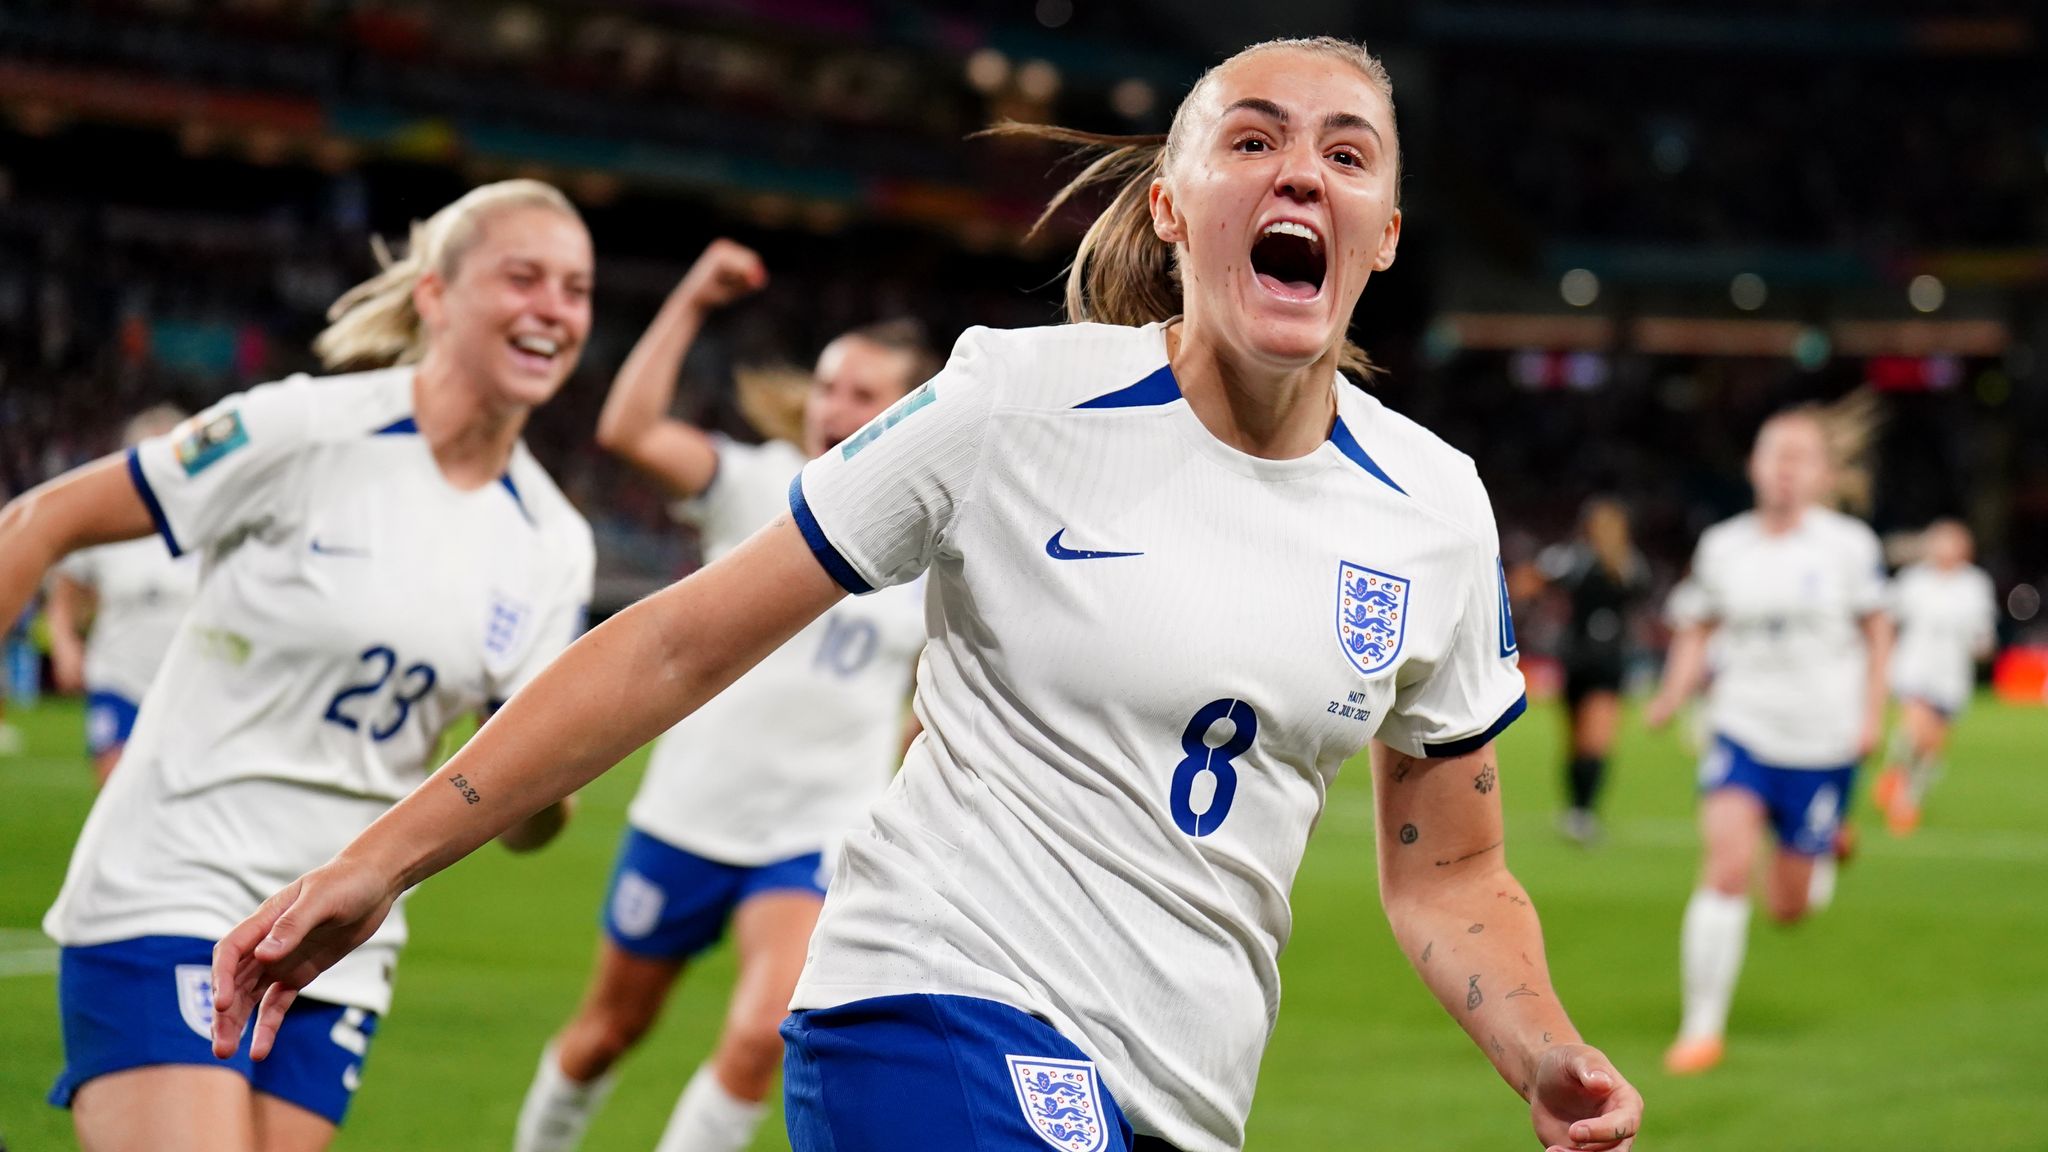 Women's World Cup: Penalty drama helps England secure 1-0 win over